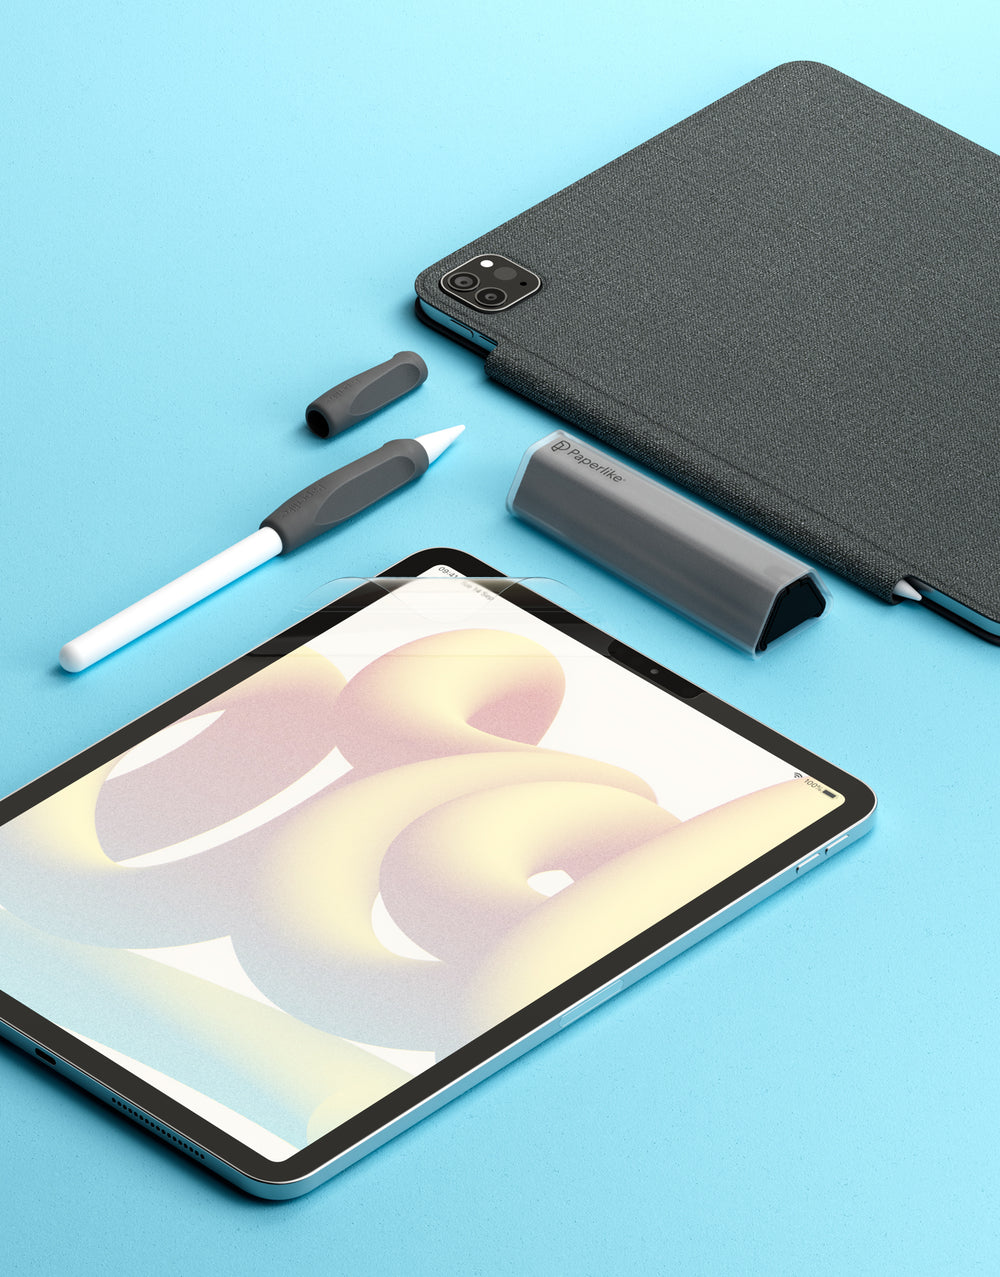 An image featuring the full suite of Paperlike products, including Paperlike’s iPad Screen Protector, Paperlike’s Folio Case, Paperlike’s Cleaning Kit, and Paperlike’s Pencil Grips.